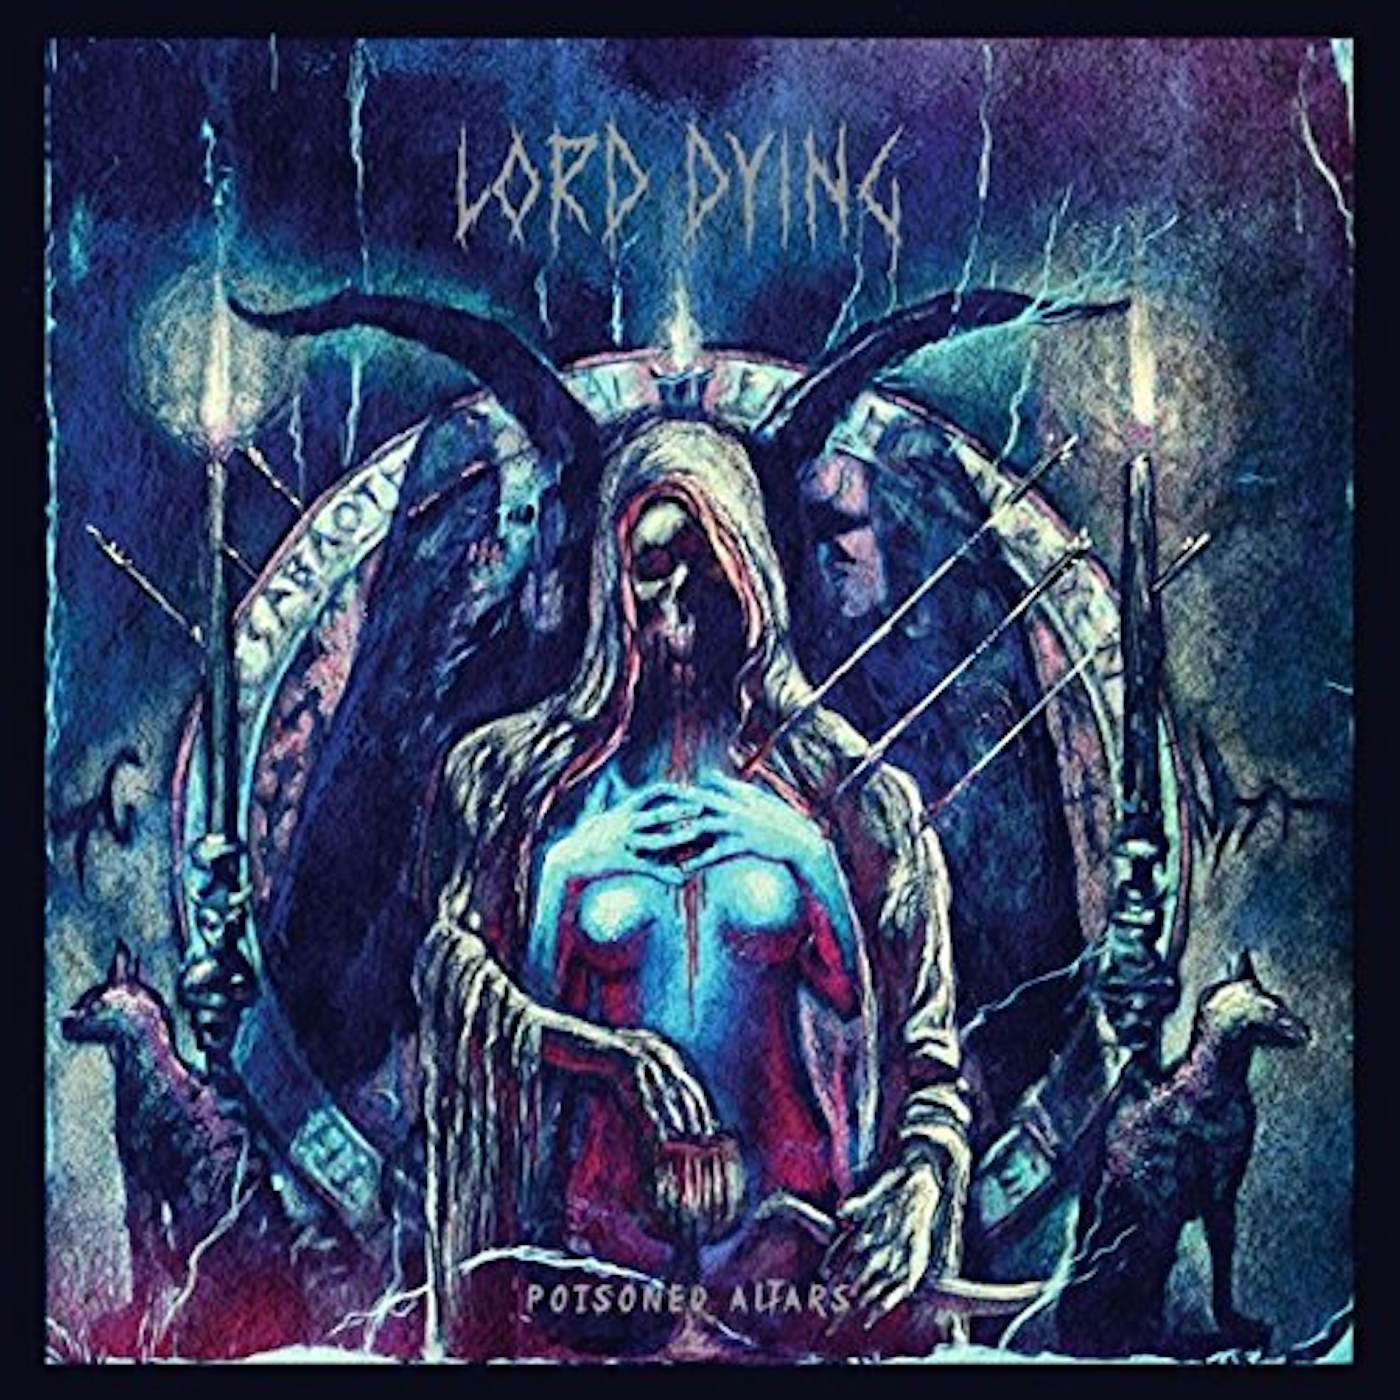 Lord Dying Poisoned Altars Vinyl Record